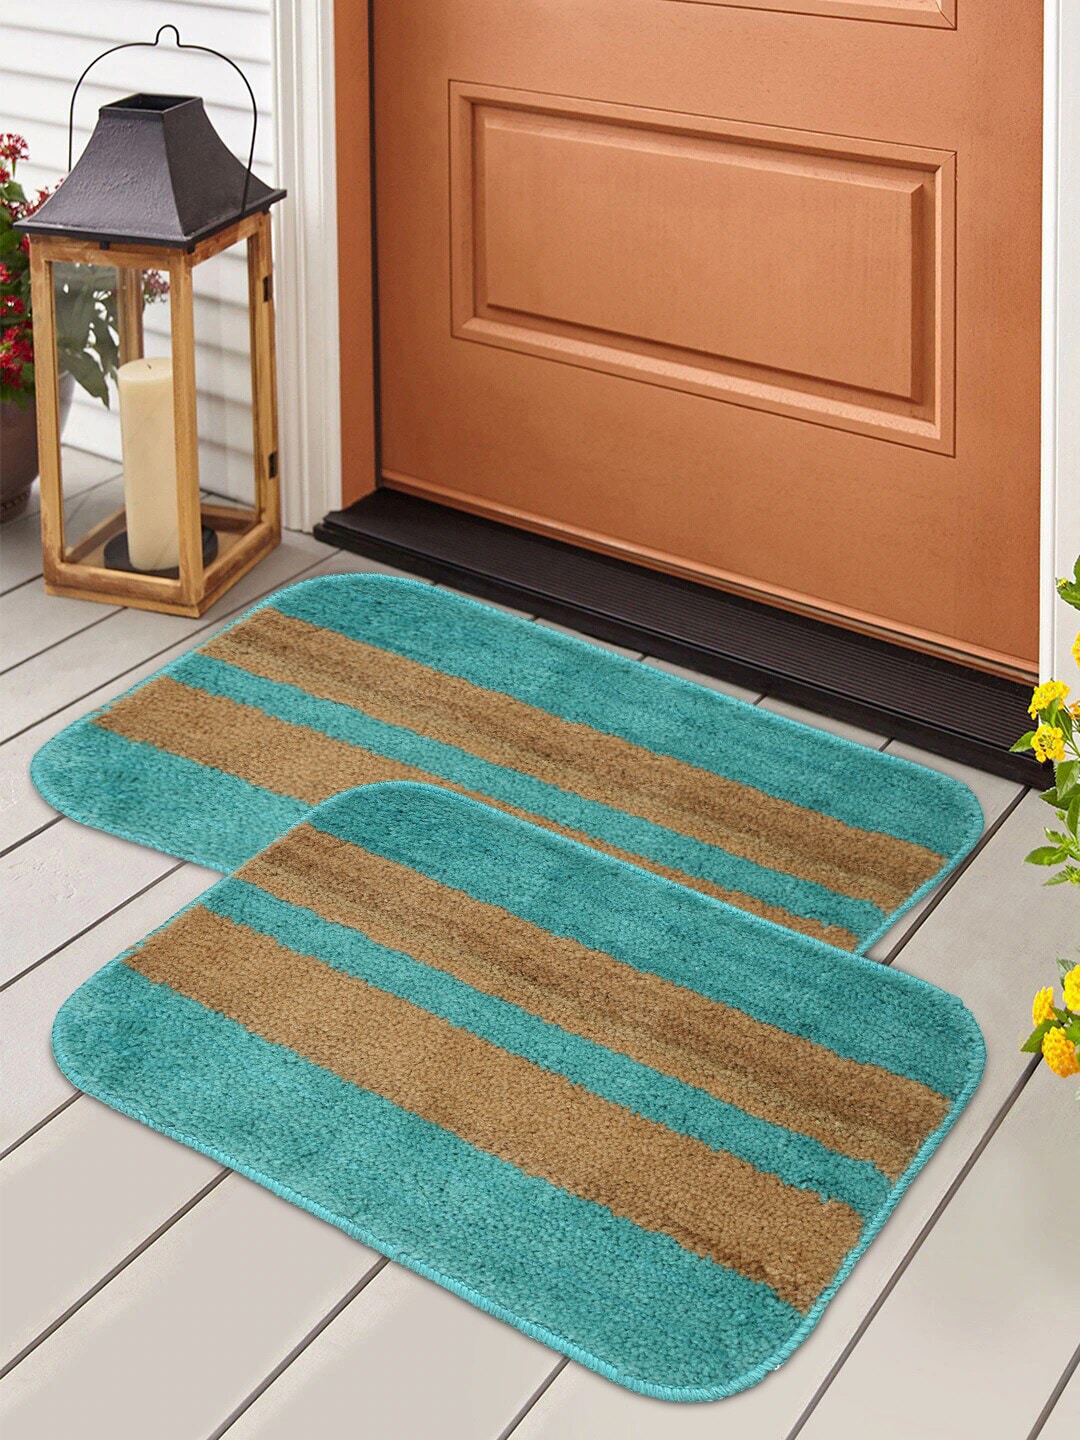 HOSTA HOMES Set Of 2 Teal Blue & Brown Striped Anti-Skid Doormats Price in India